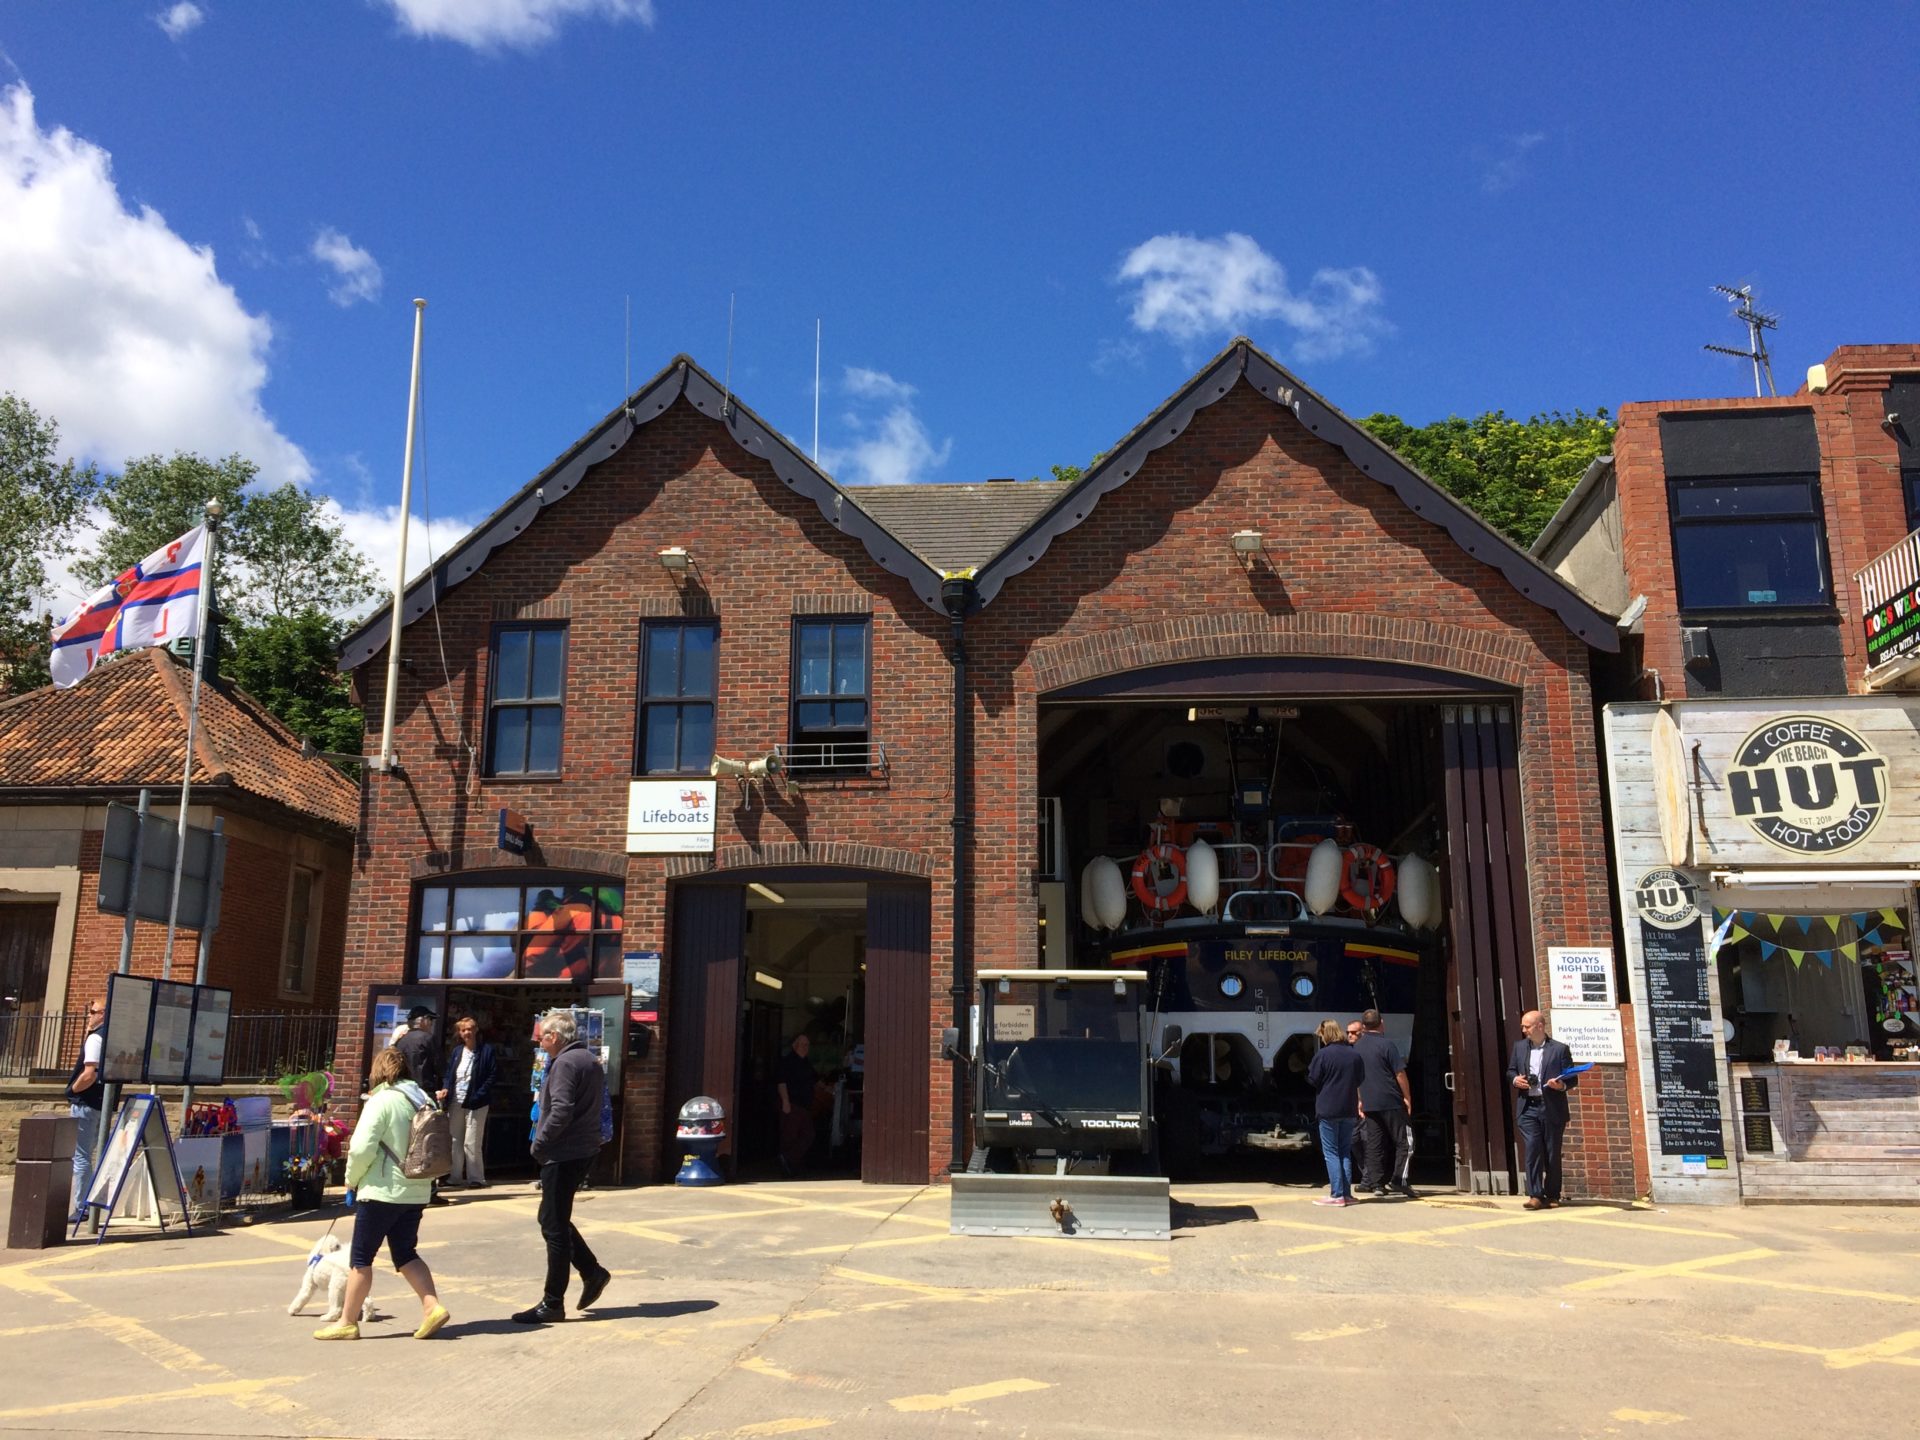 Planning Success for the RNLI Lifeboat station at Filey